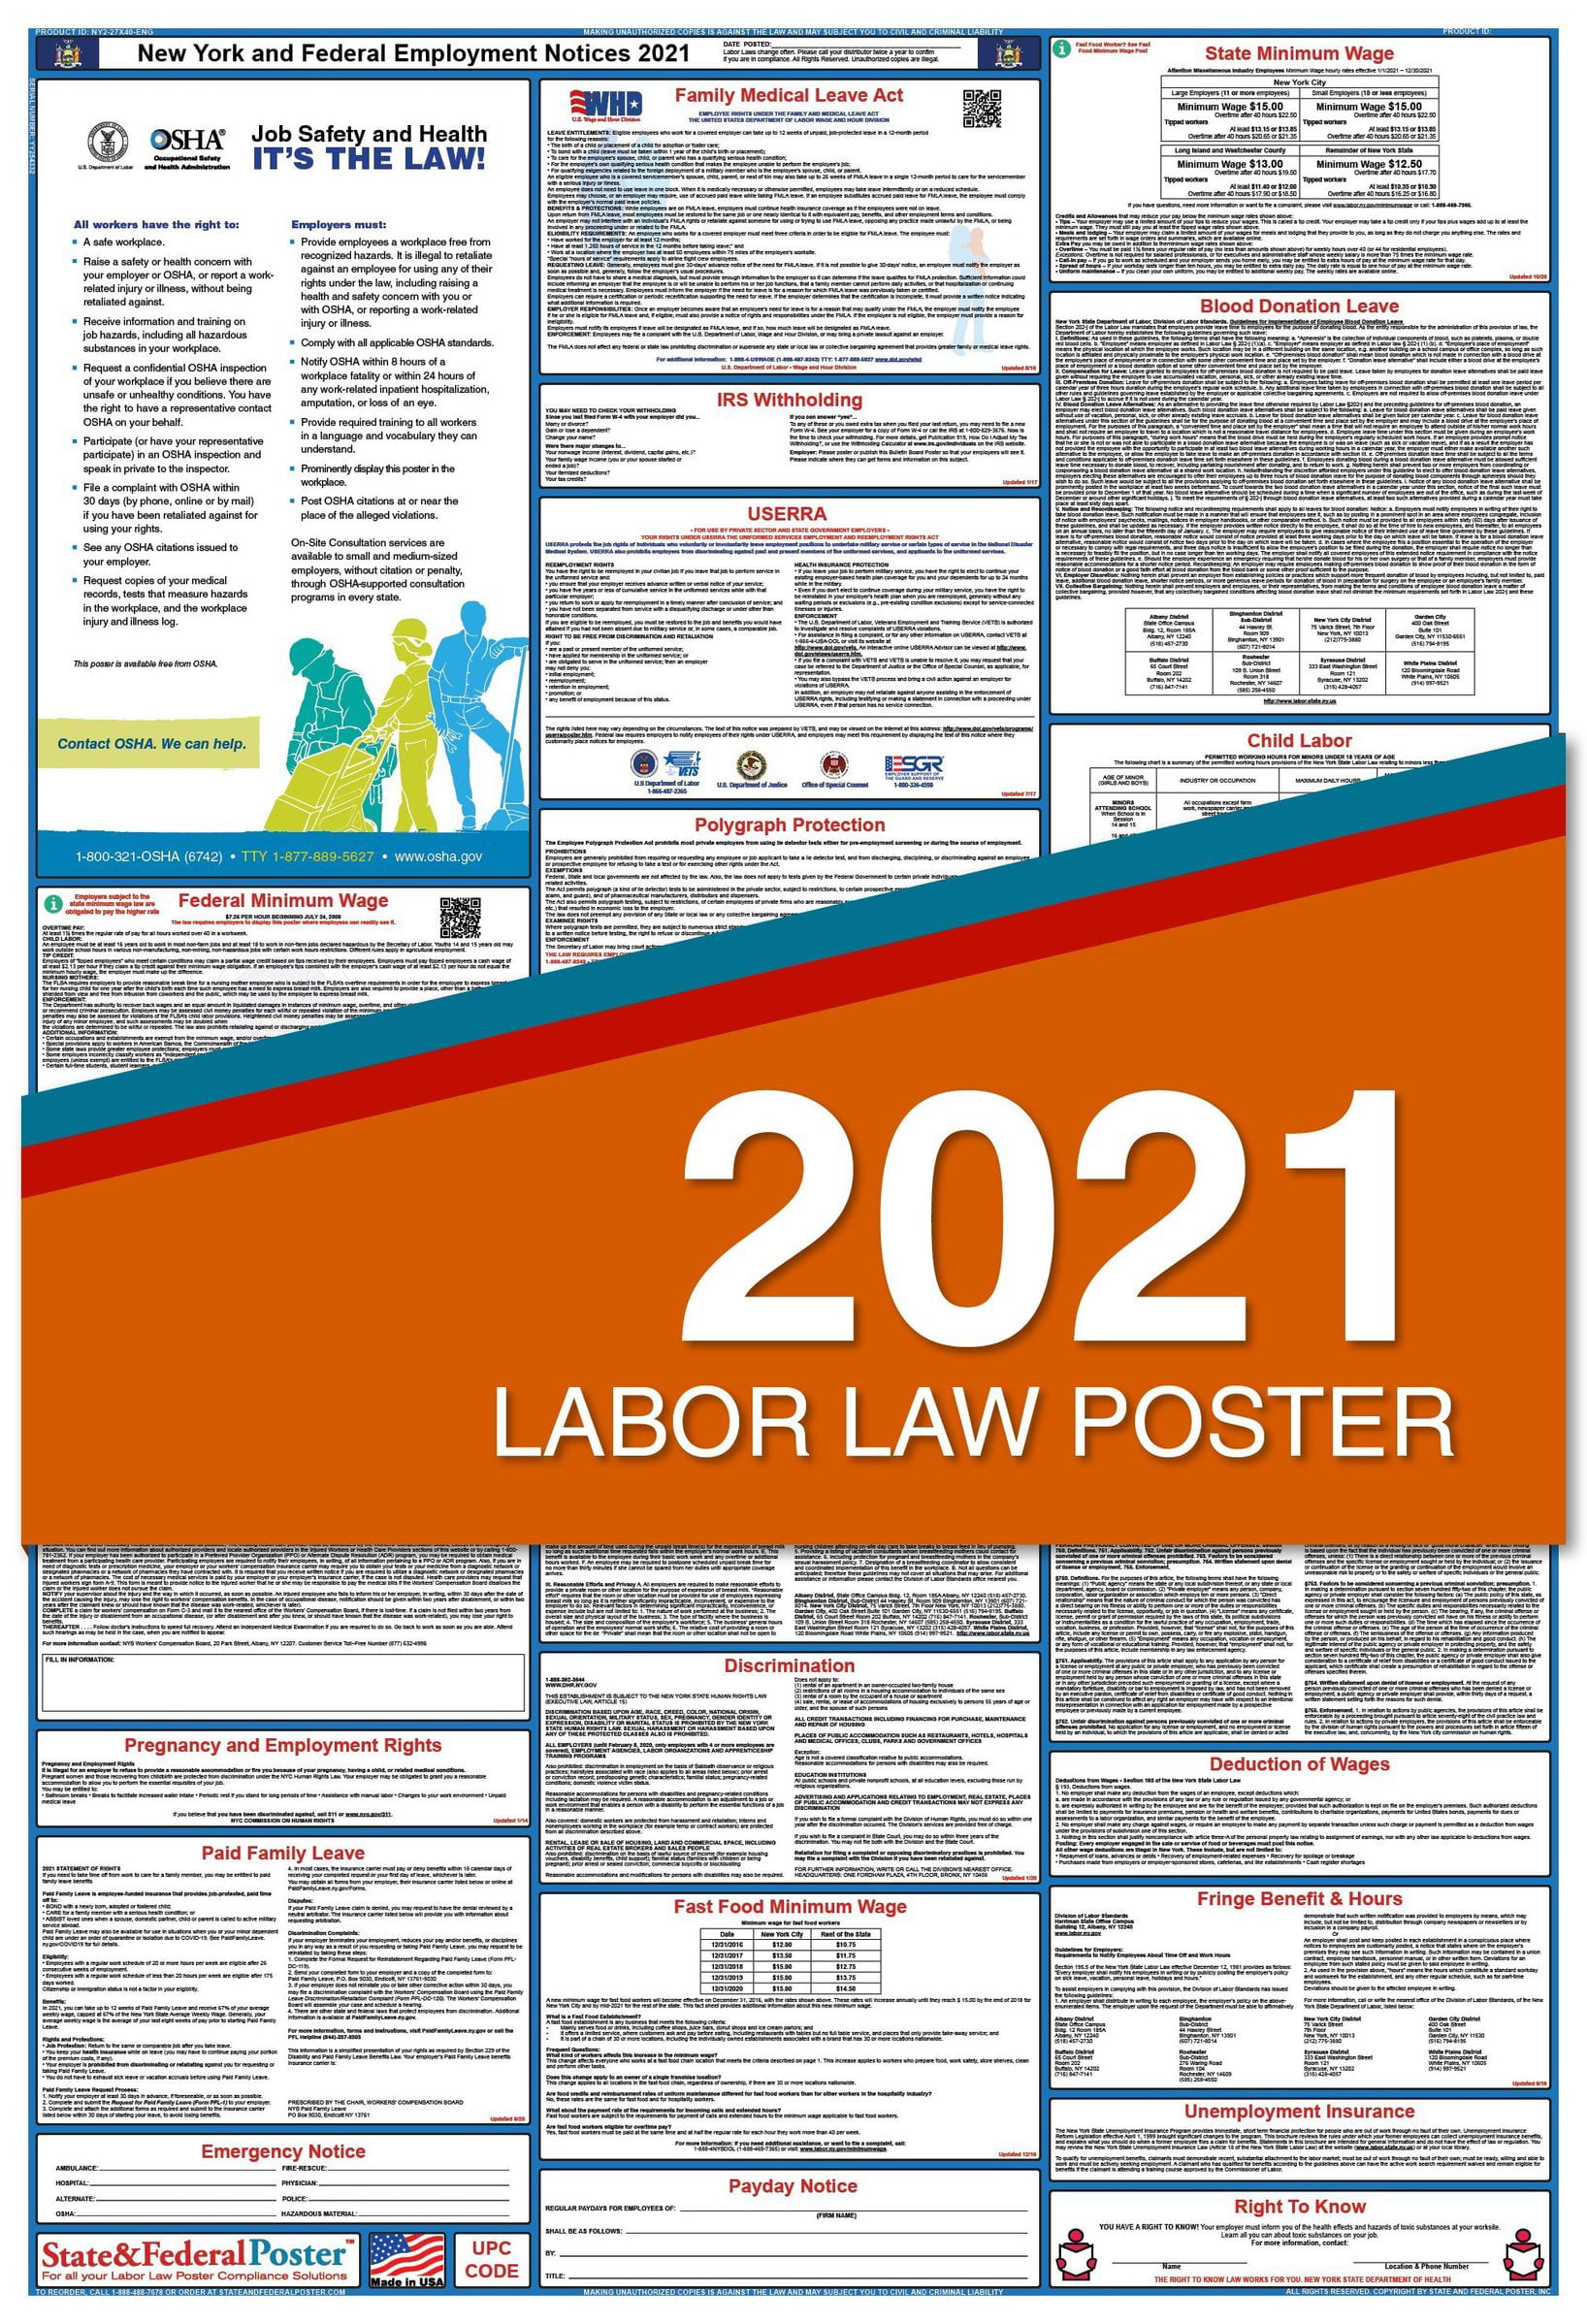 New York State Labor Laws